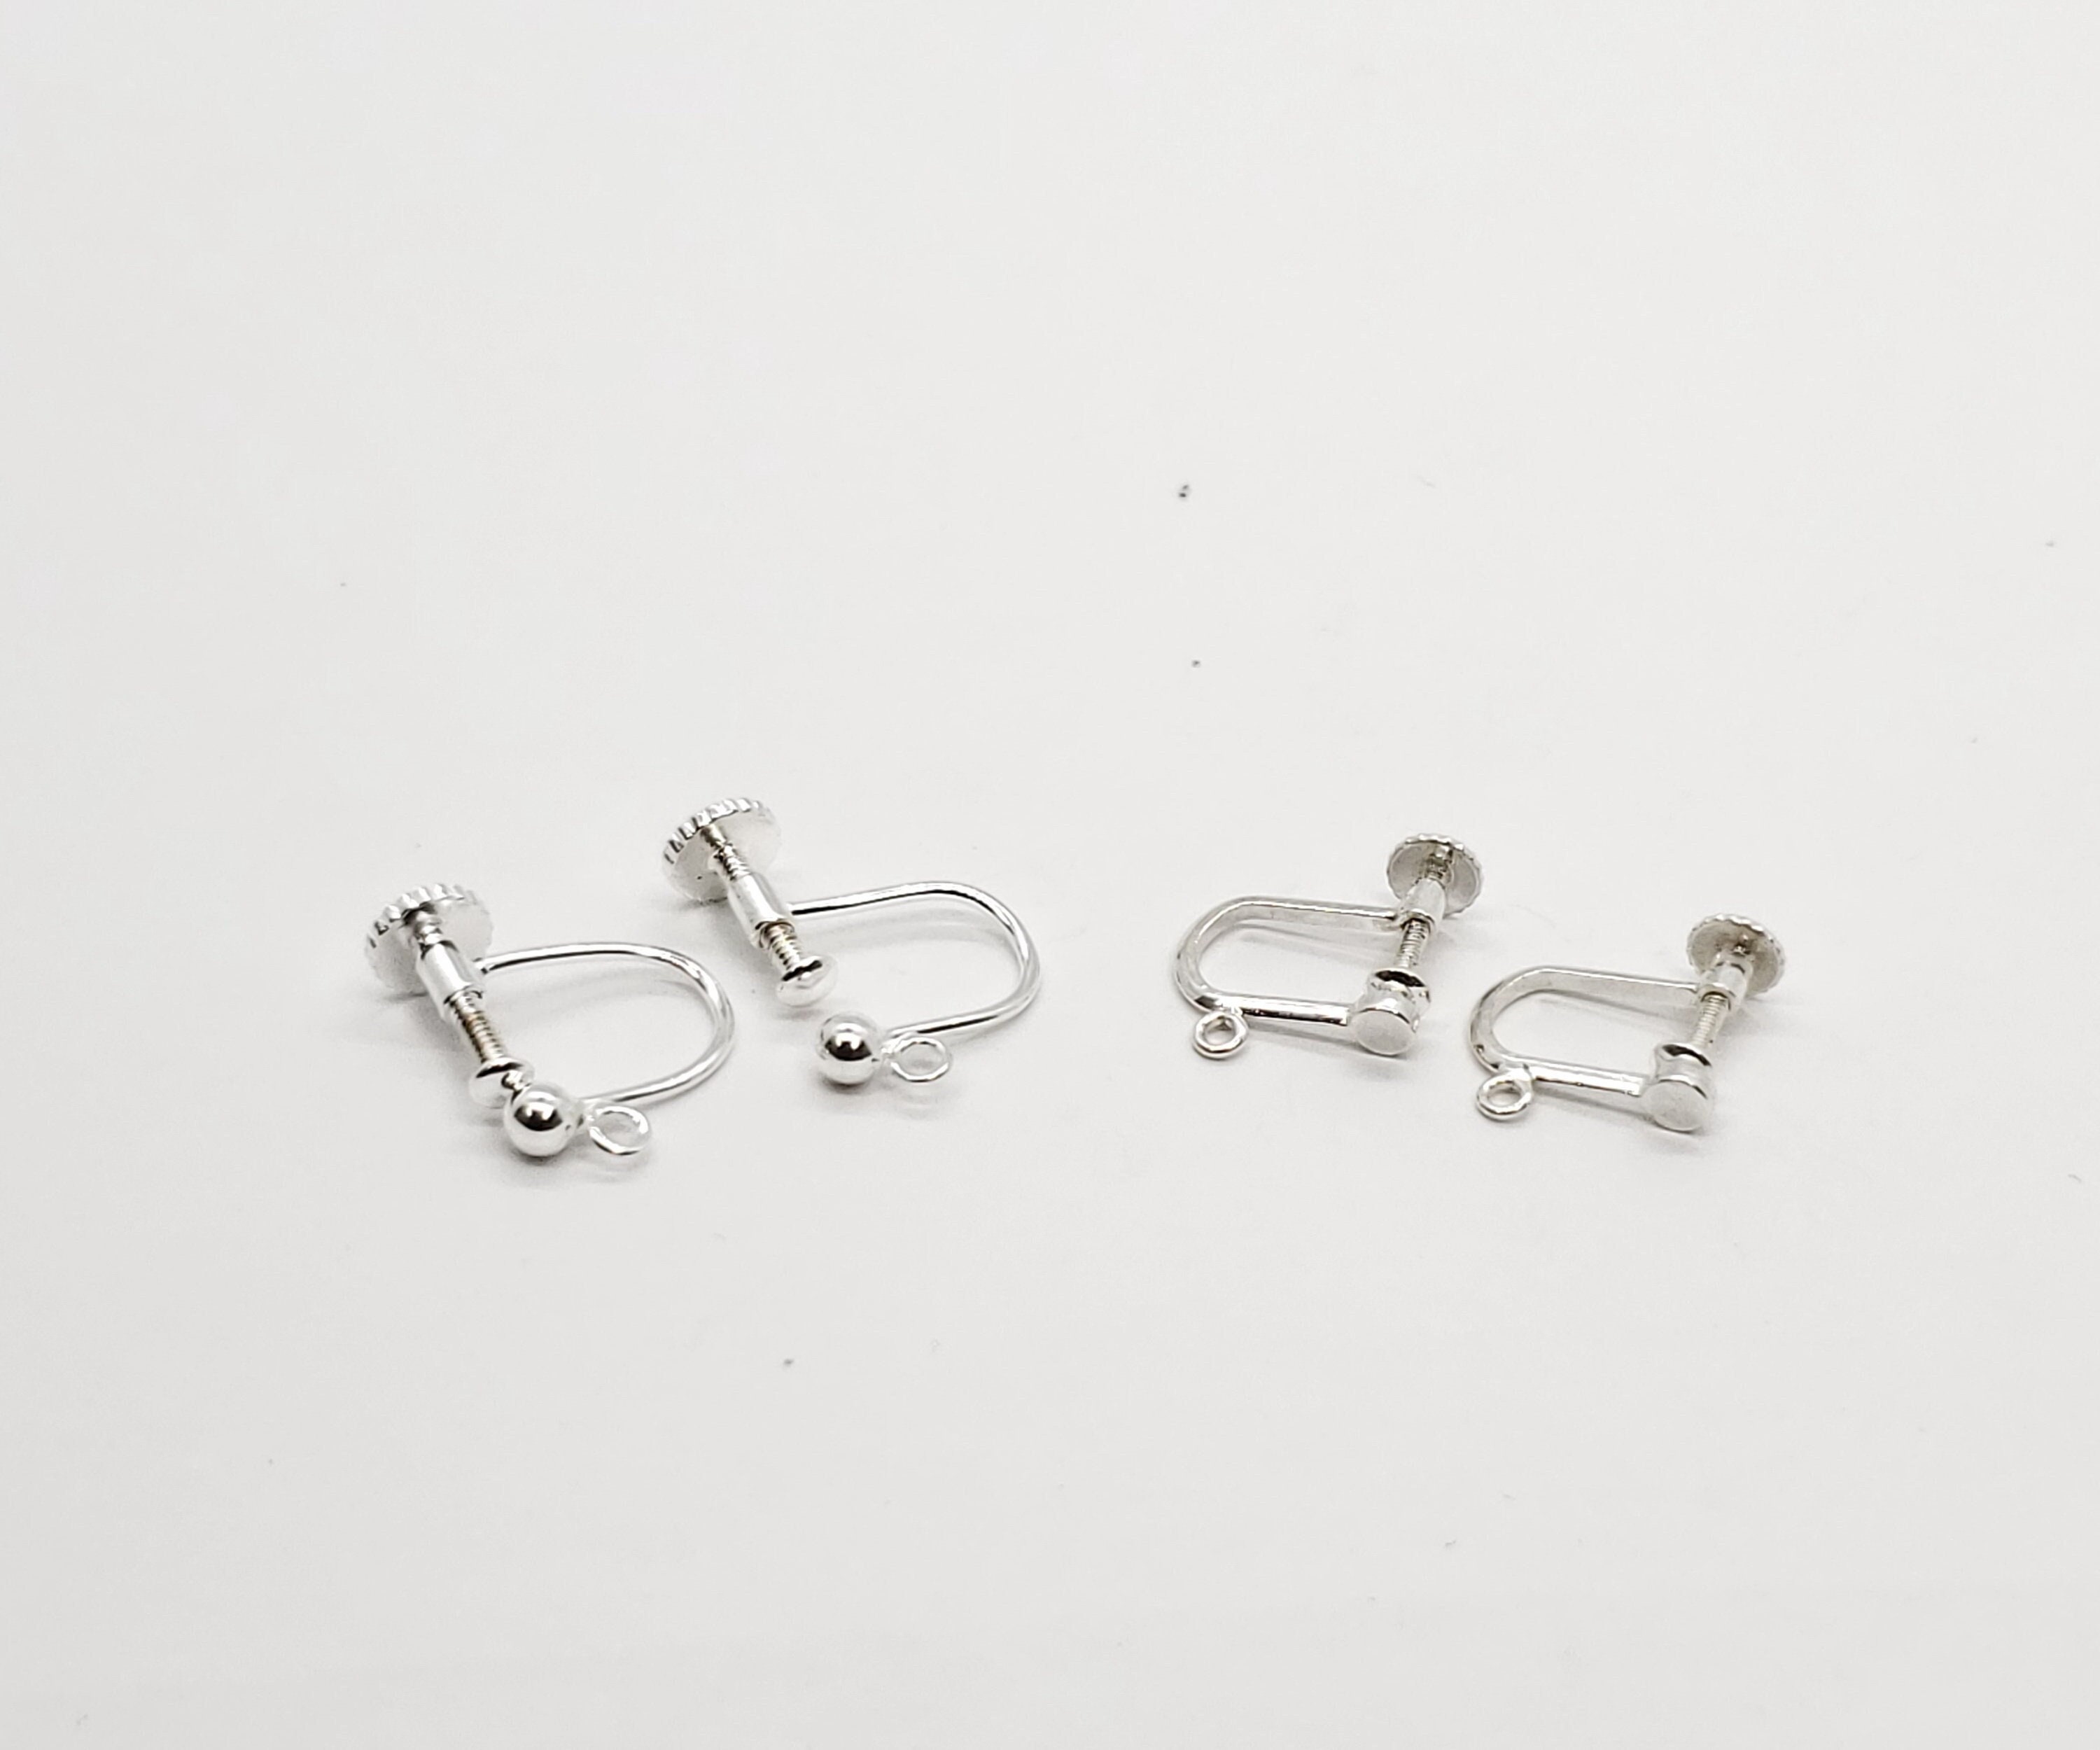 Clamp-On Adjustable Clip On Earring 13mm Pad Screw Backs 1 Pair 3206